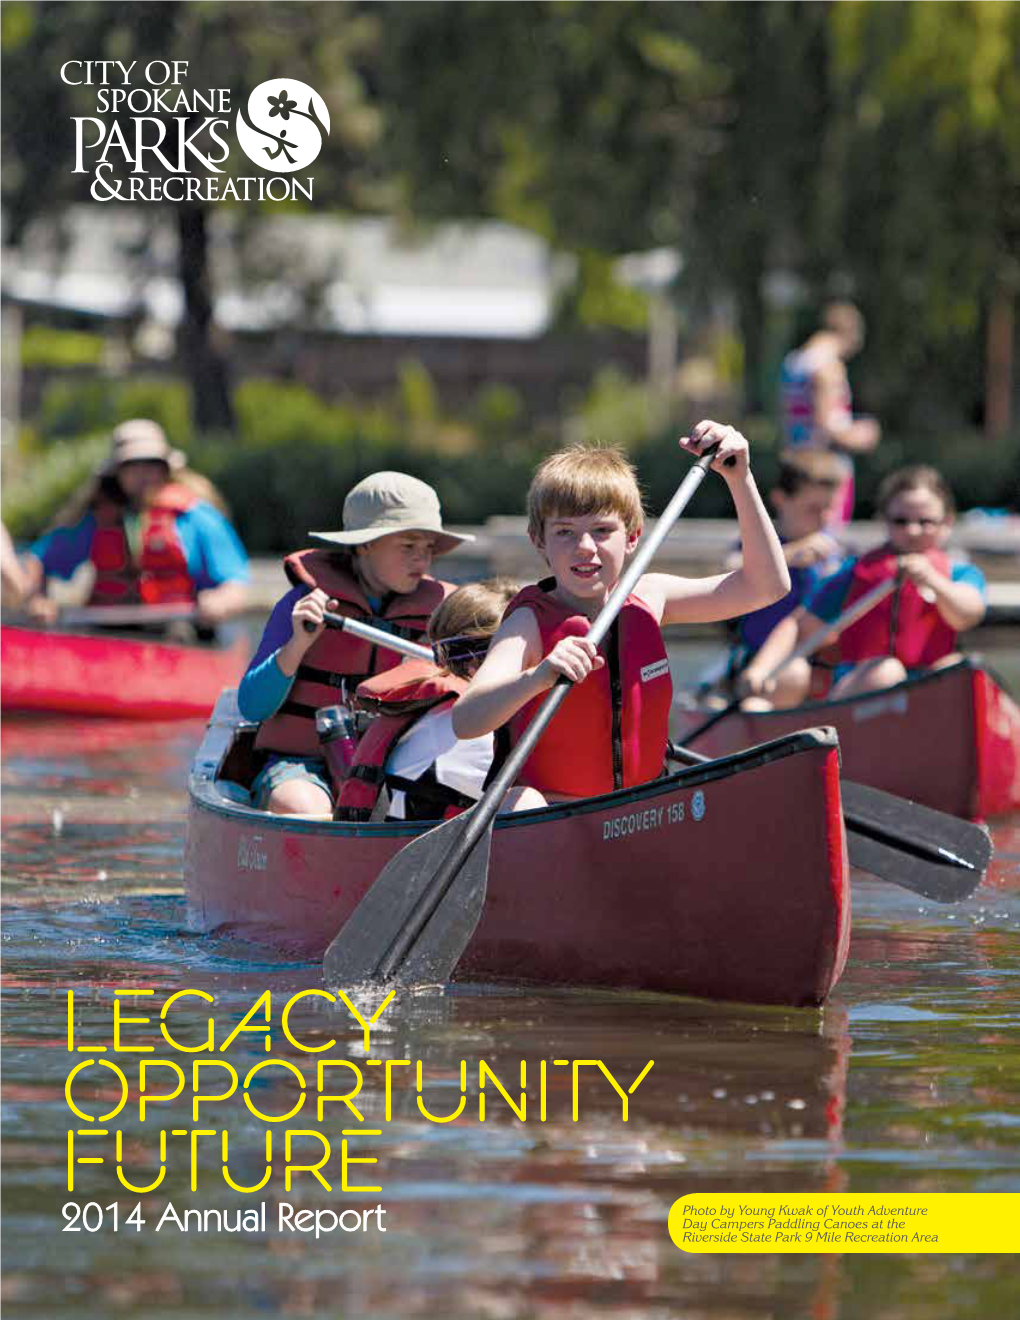 City of Spokane Parks and Recreation 2014 Annual Report